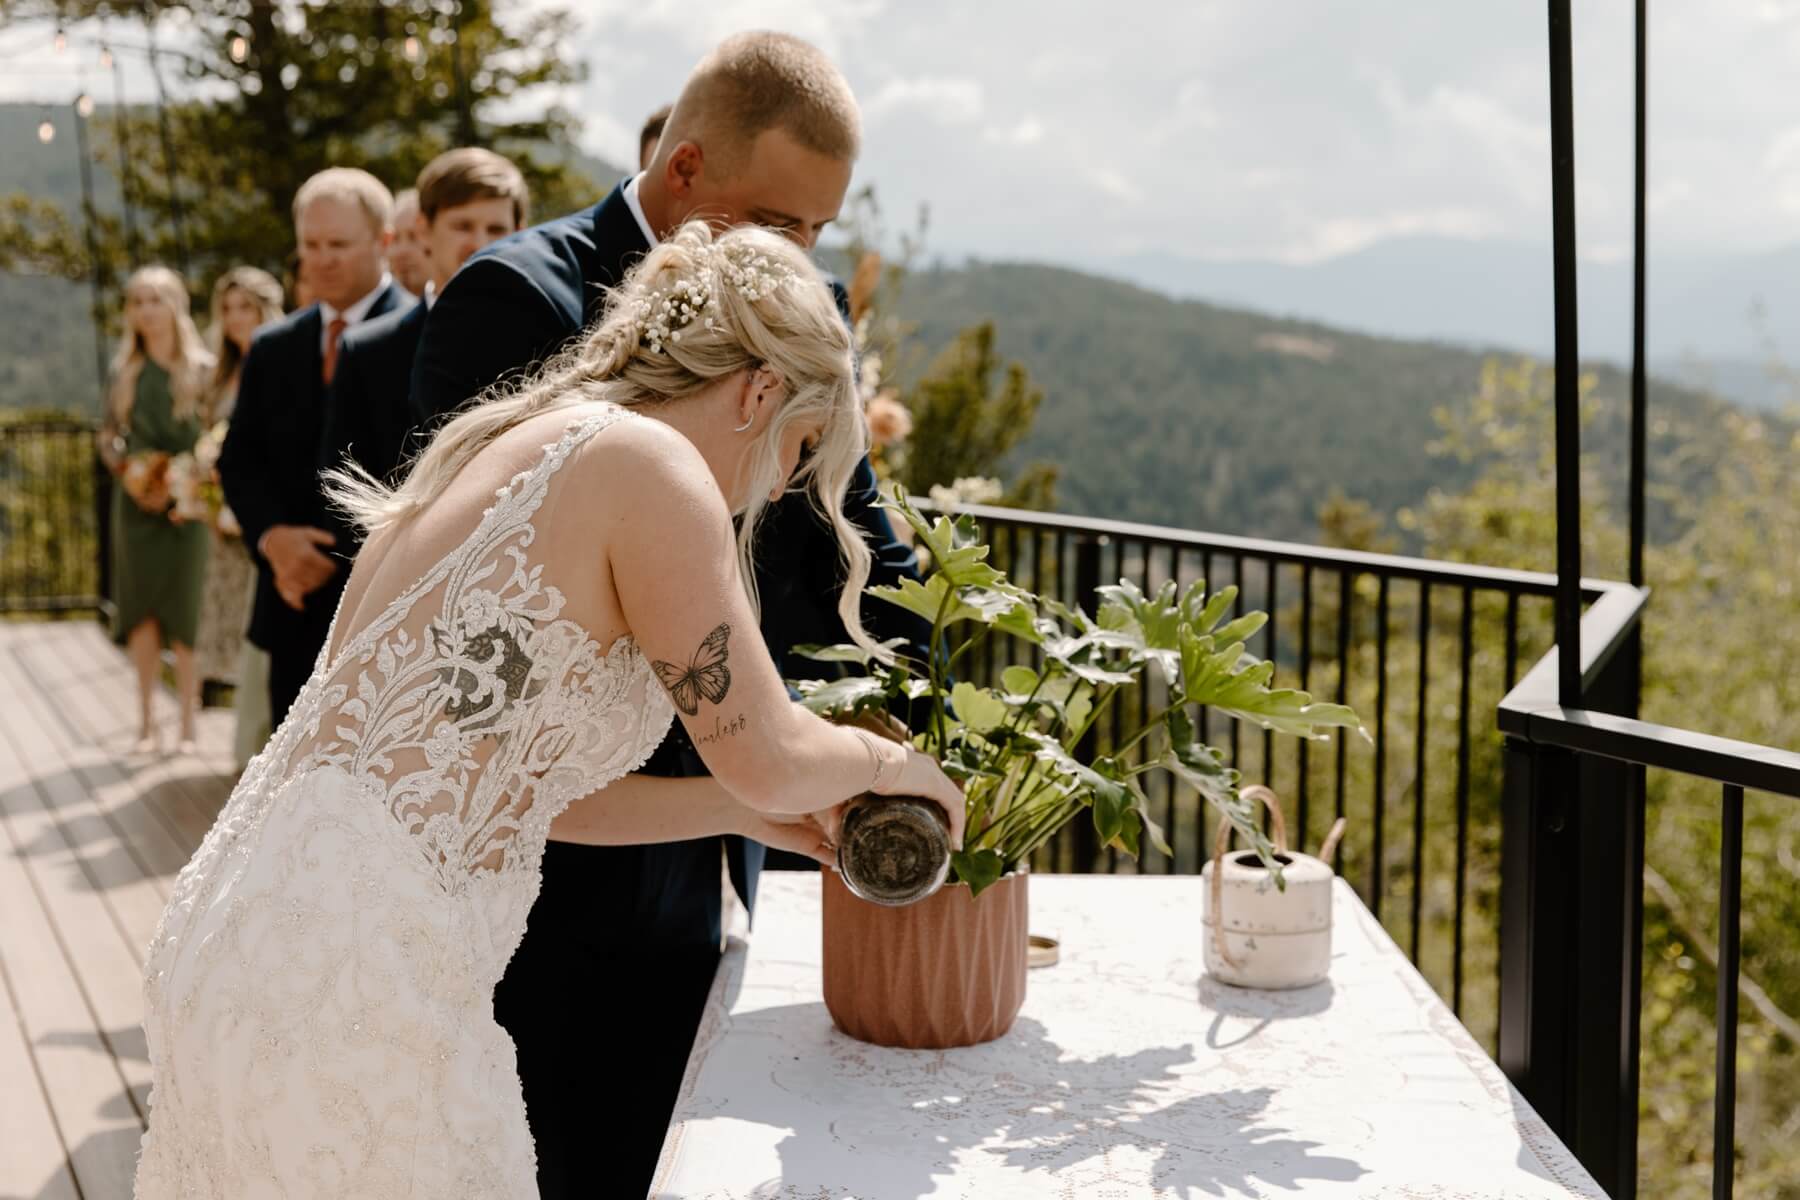 Bride pouring dirt into pot during unity plant potting during wedding ceremony | McArthur Weddings and Events